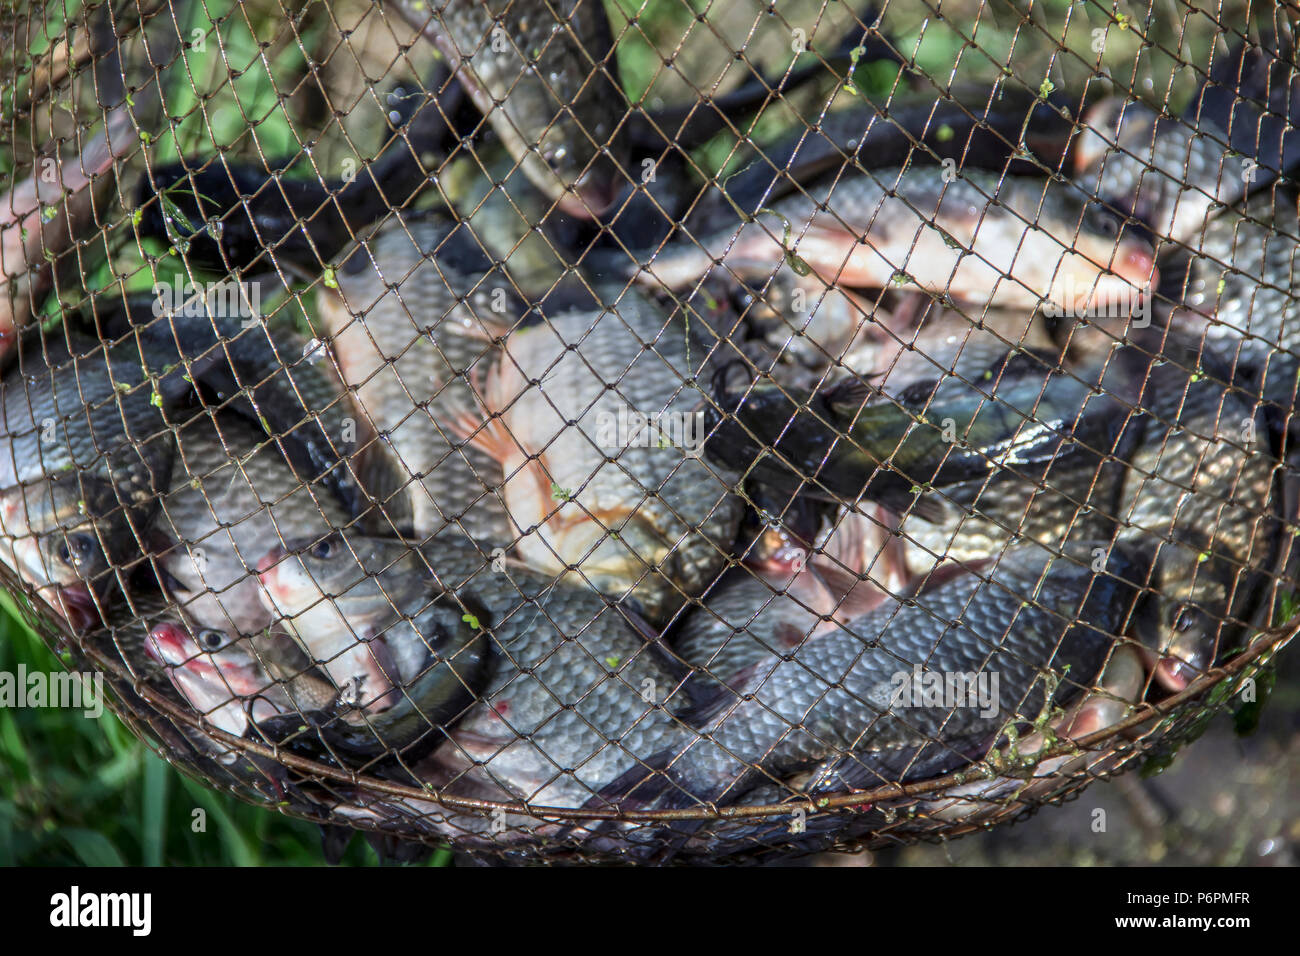 River Bega (Begej), Vojvodina, Serbia - Wire keeper net filed with a bounty  of freshwater fish Stock Photo - Alamy